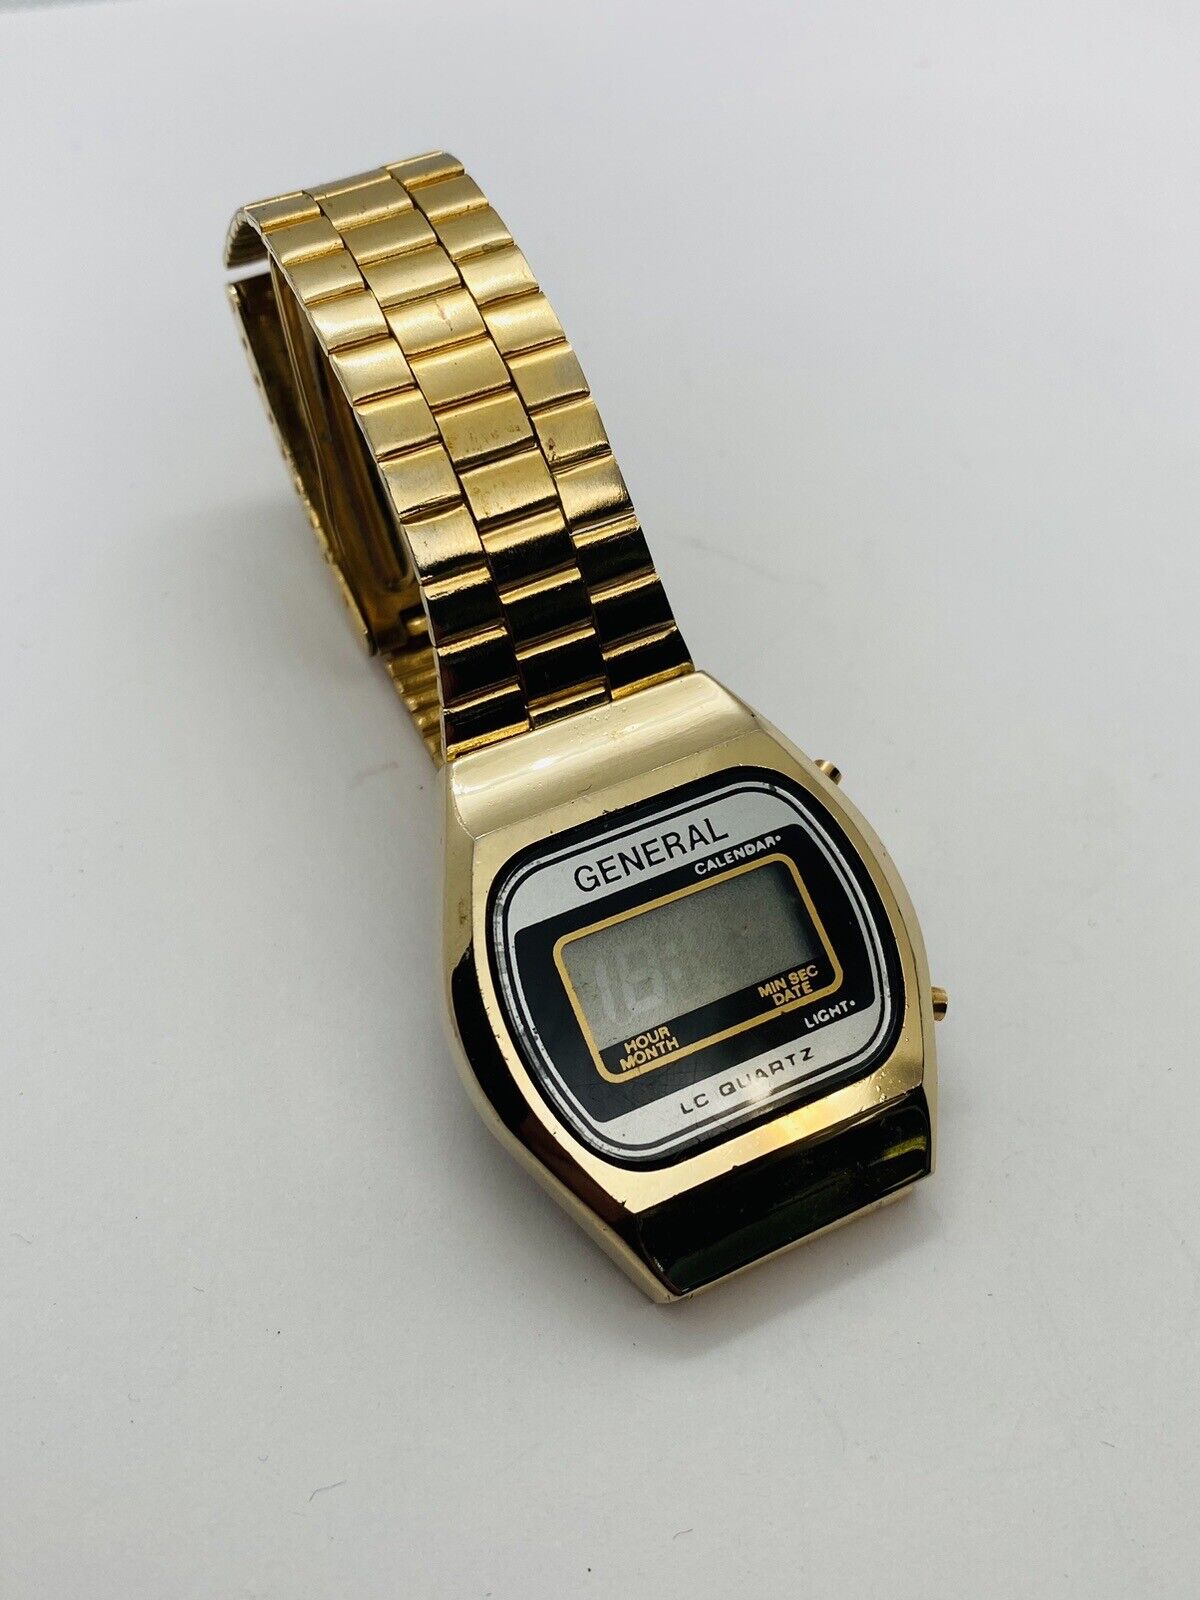 VINTAGE GENERAL MENS 1980s LC QUARTZ WATCH GOLDTONE ISSUE NOT WORKING